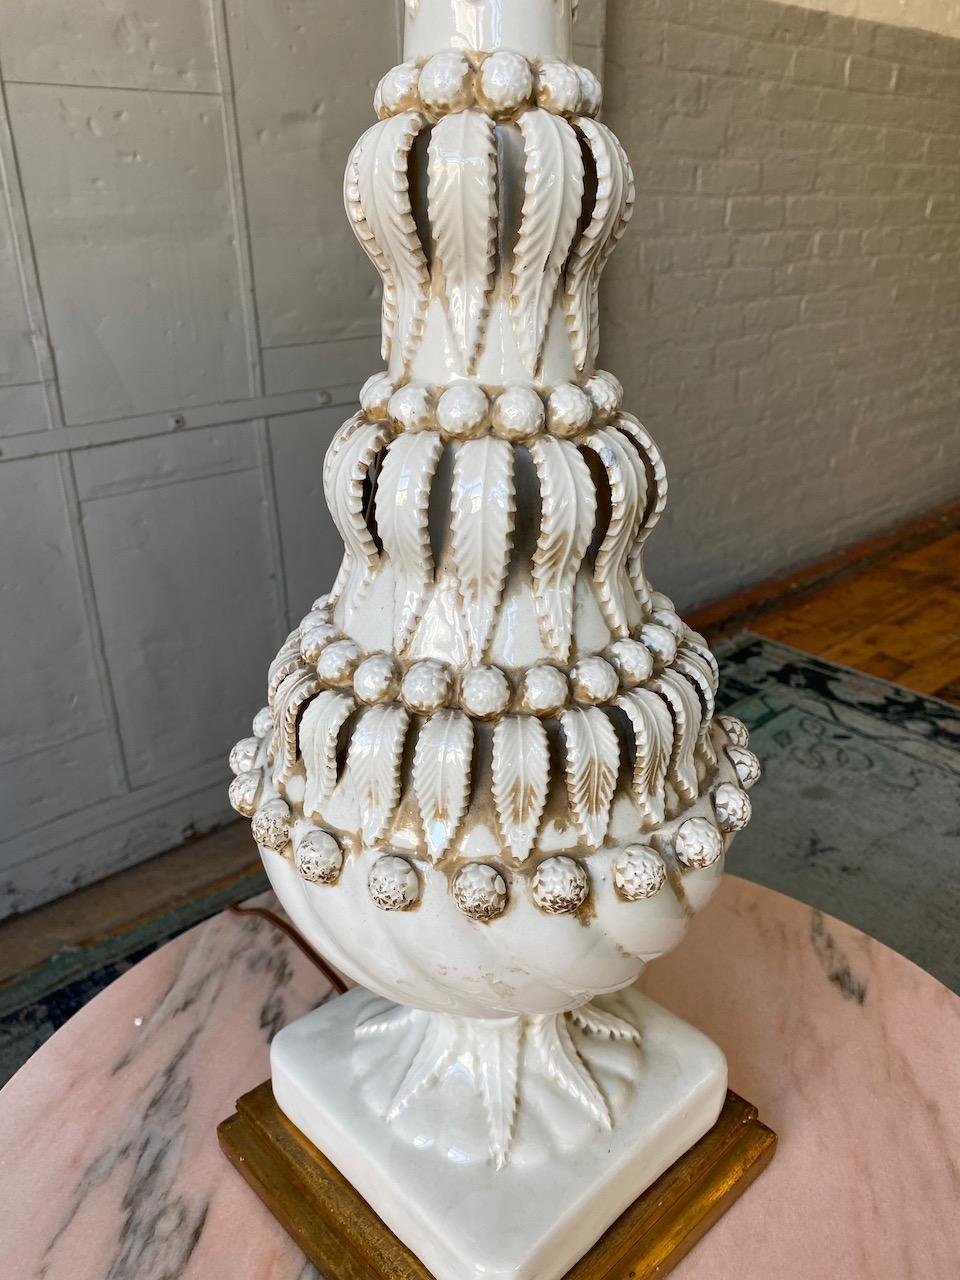 Ornate Spanish Ceramic Table Lamp With Leaf Decorations In Good Condition For Sale In Buchanan, NY